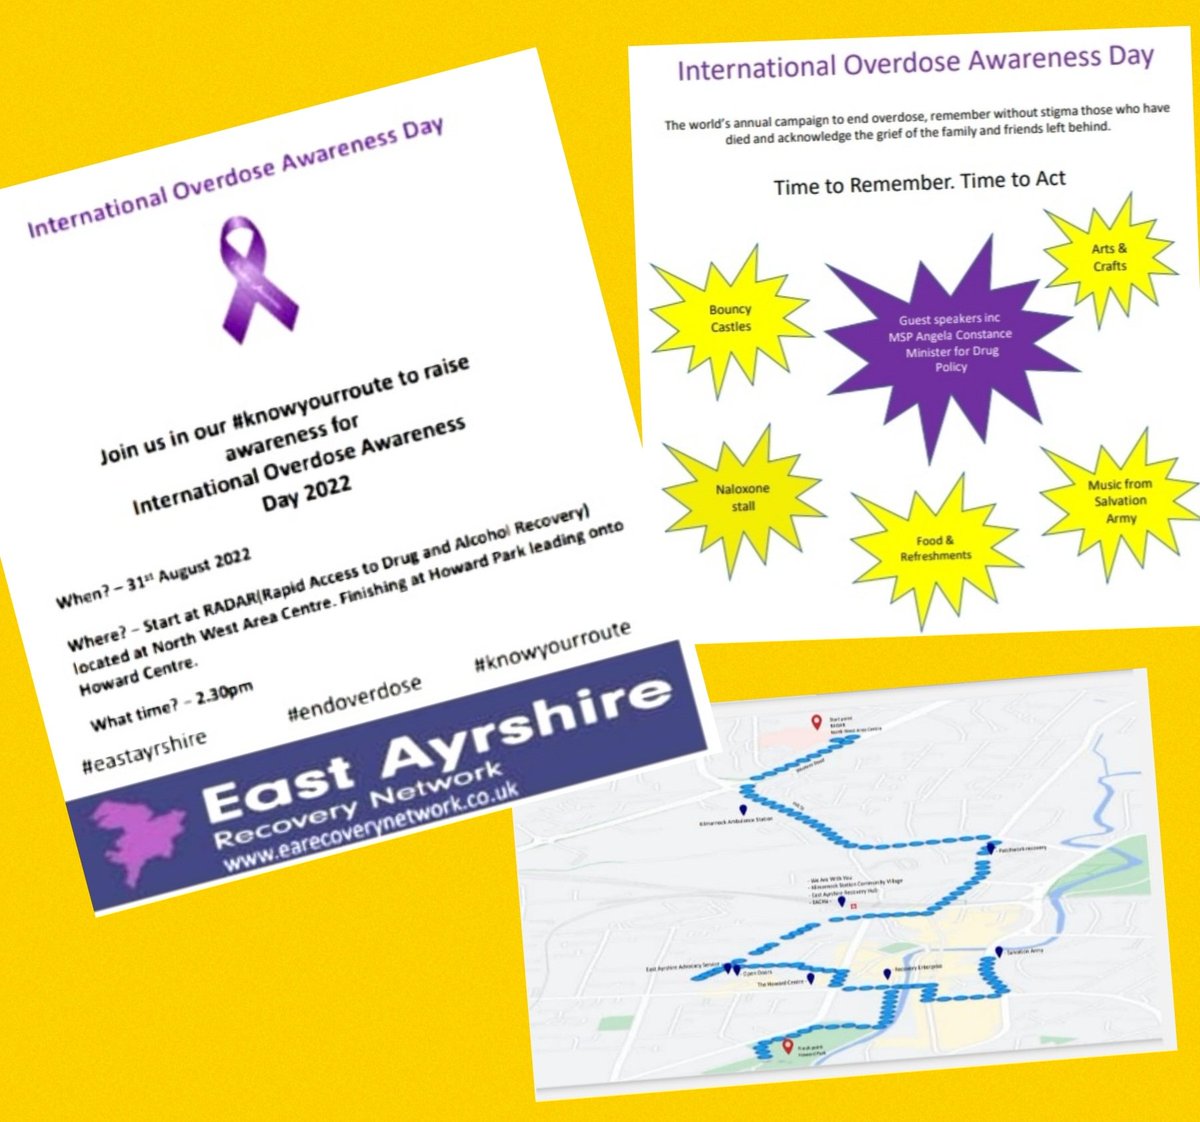 We would like you invite families and individuals to join our #knowyourroute event to raise awareness of prevention for #internationaloverdoseawarenessday ...family friendly #workingtogher @EAHSCP @MaclellanCarole @ea_adp @AConstanceSNP @VibrantEAC @PSST_NHSaaa @EastAyrshire